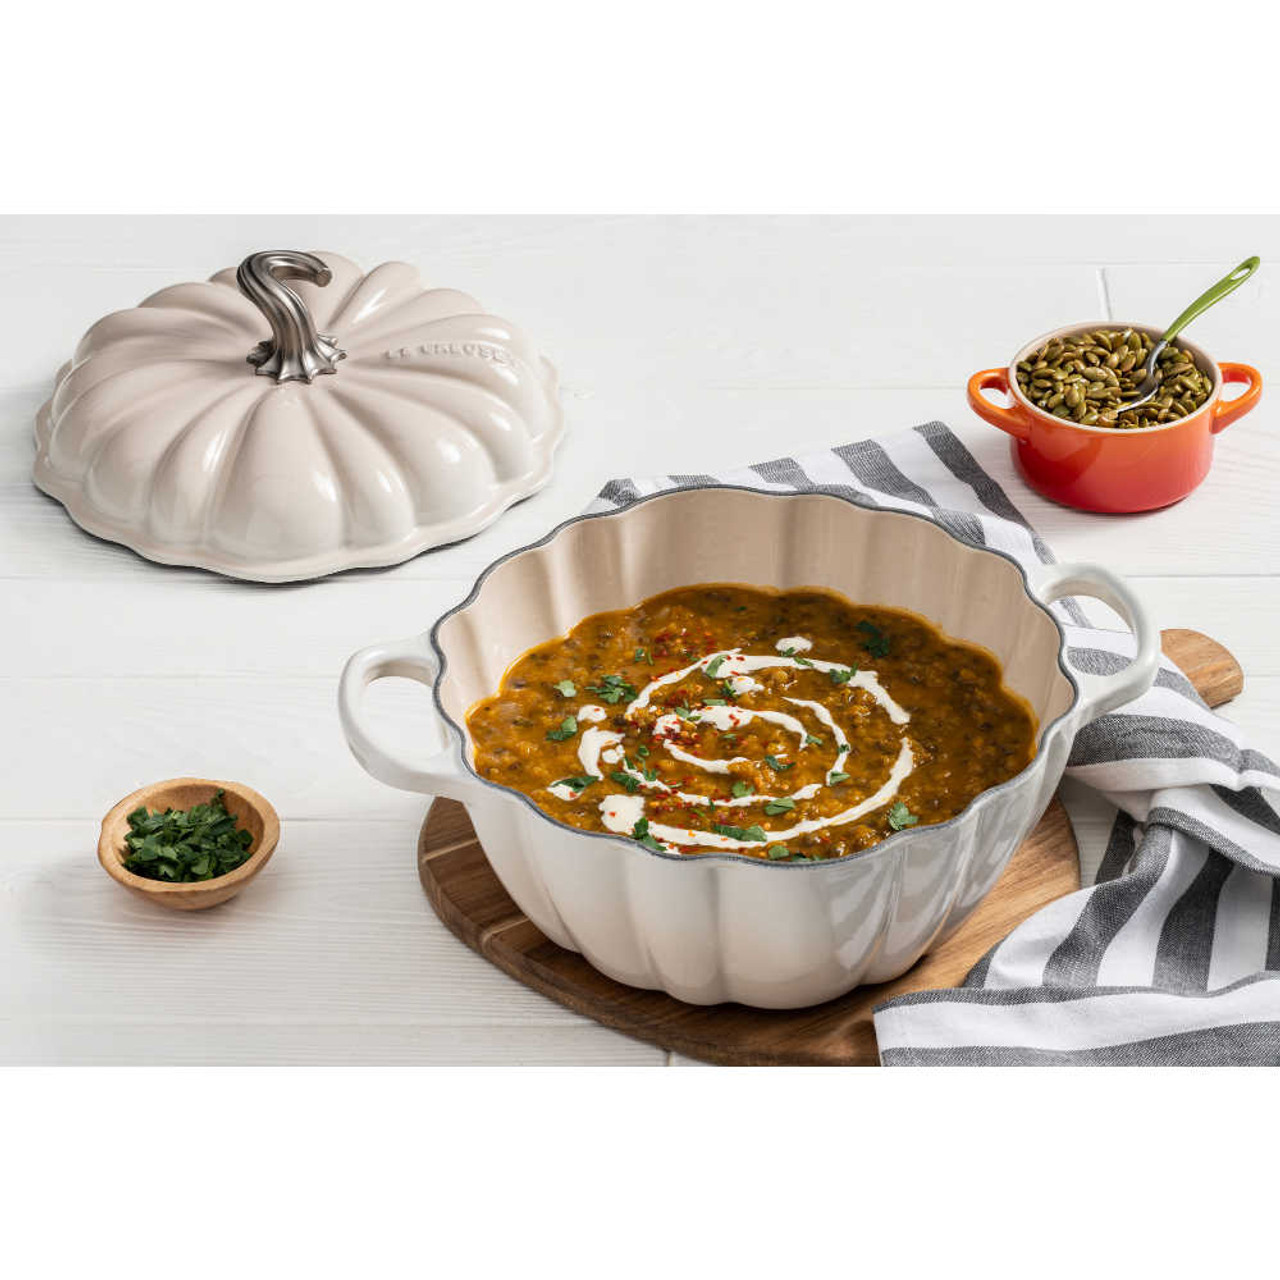 https://cdn11.bigcommerce.com/s-hccytny0od/images/stencil/1280x1280/products/4984/21122/Le_Creuset_Pumpkin_Cocotte_in_Meringue_1__88963.1660756516.jpg?c=2?imbypass=on